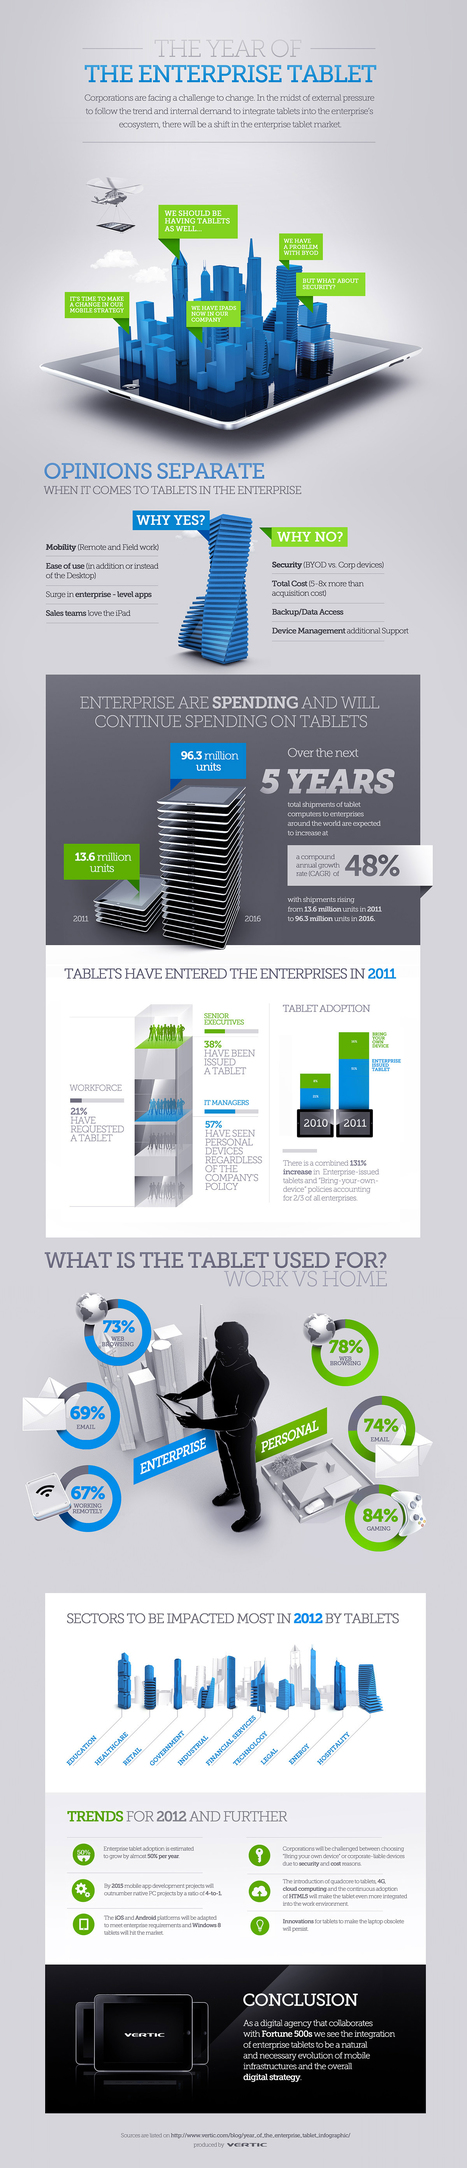 The Year Of the Enterprise Tablet [Infographic] | digital marketing strategy | Scoop.it